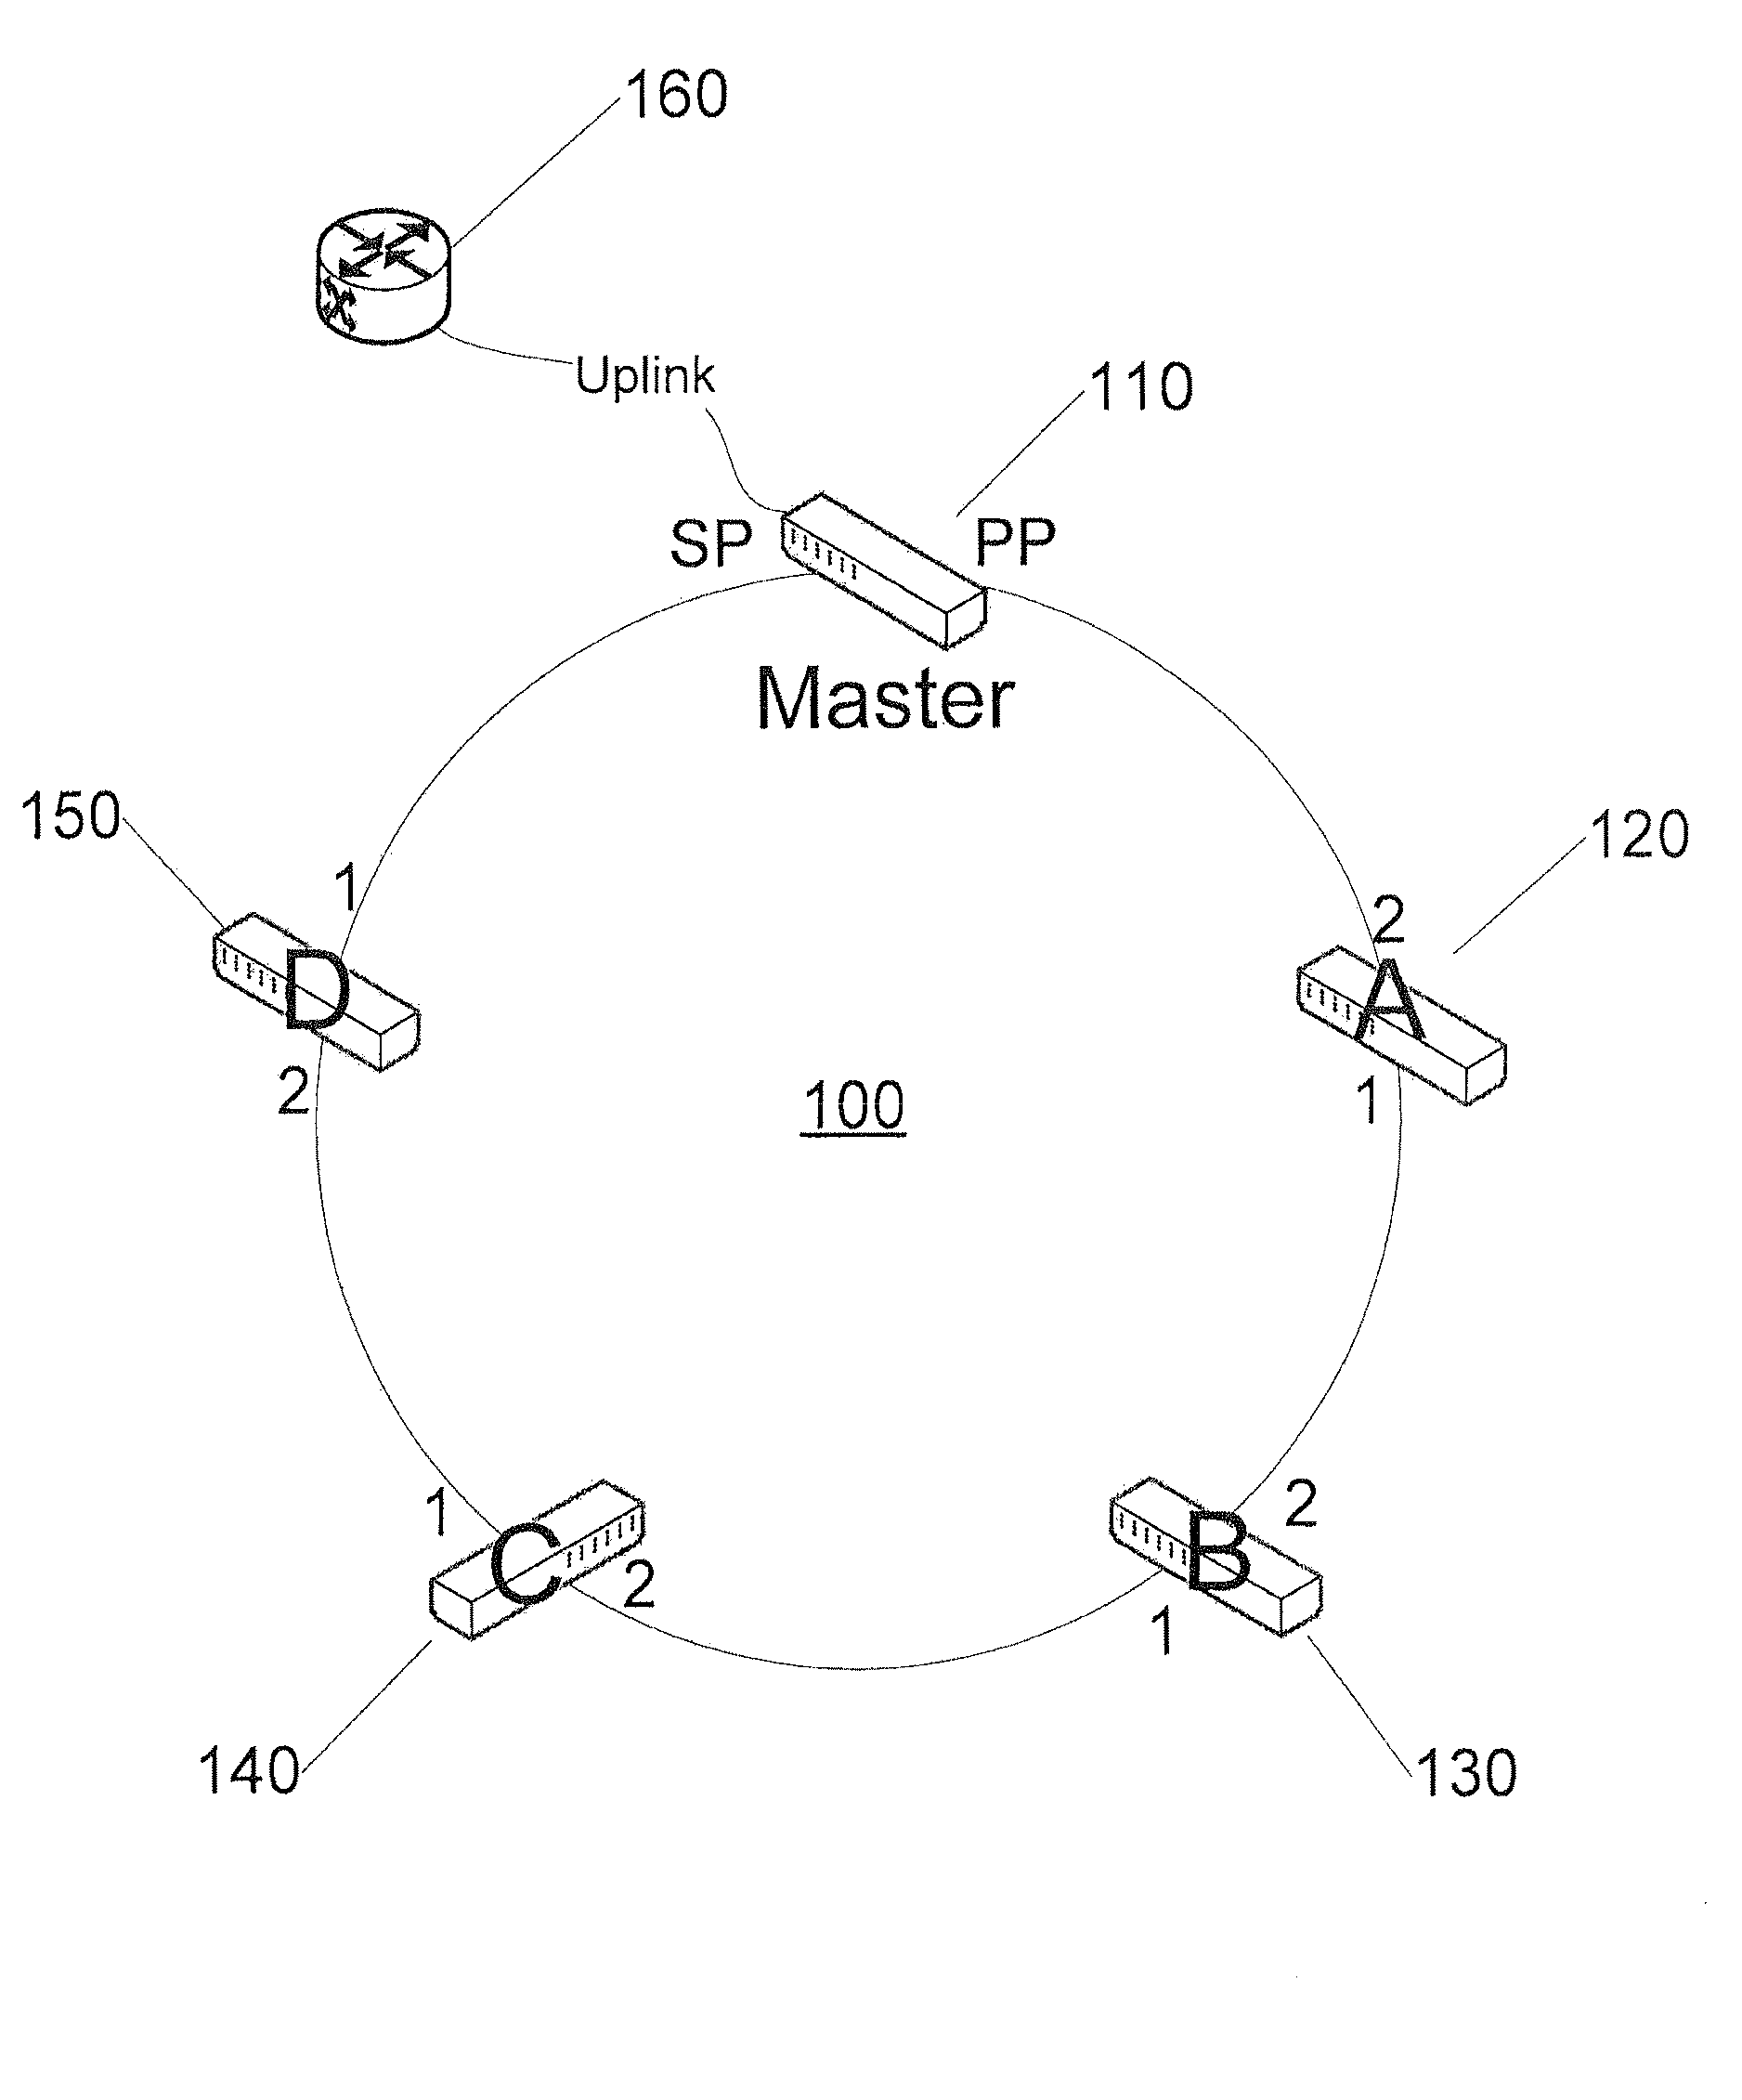 System and method for network recovery from multiple link failures